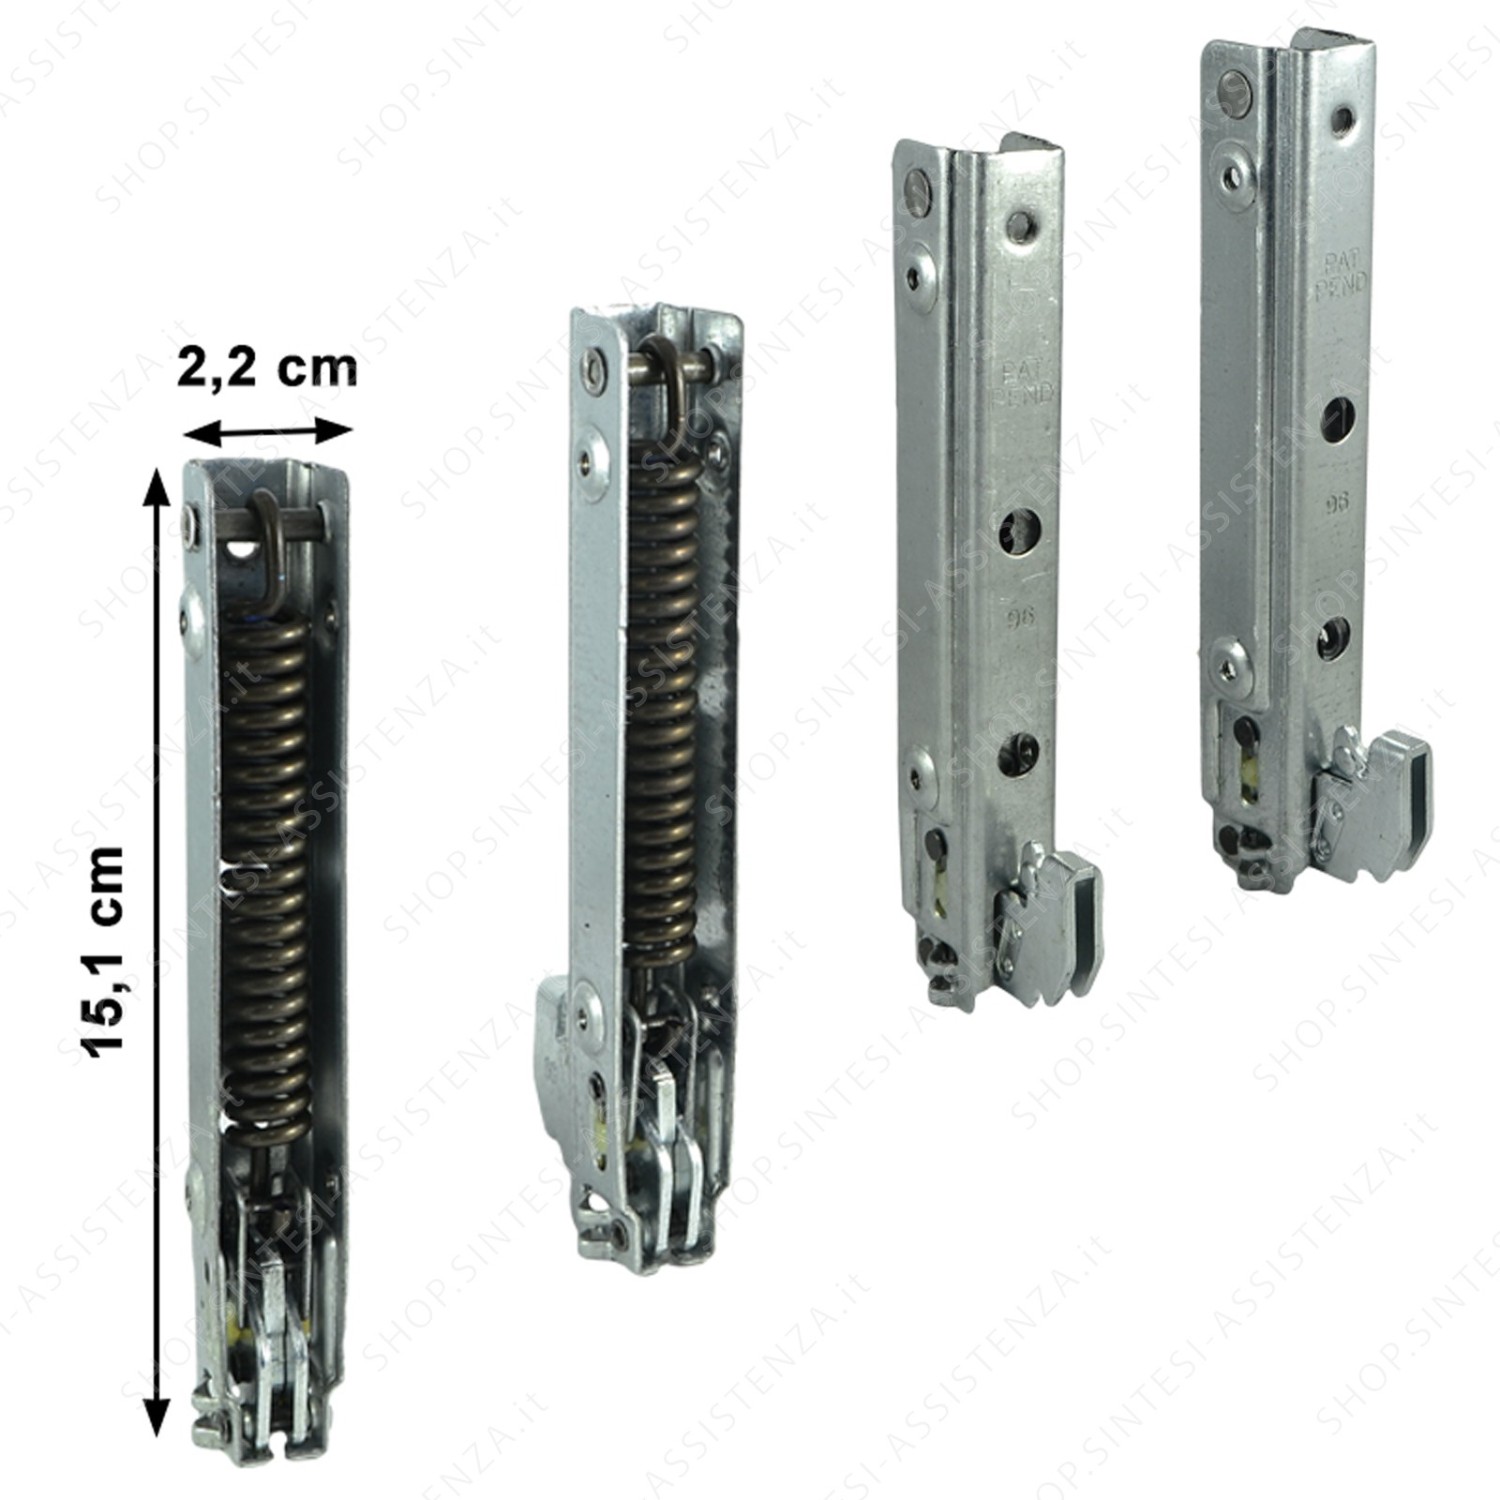 PAIR OF LEFT AND RIGHT HINGES FOR 2 GLASS OVEN DOOR FOSTER GLEM 9401033 - 9401033 X2